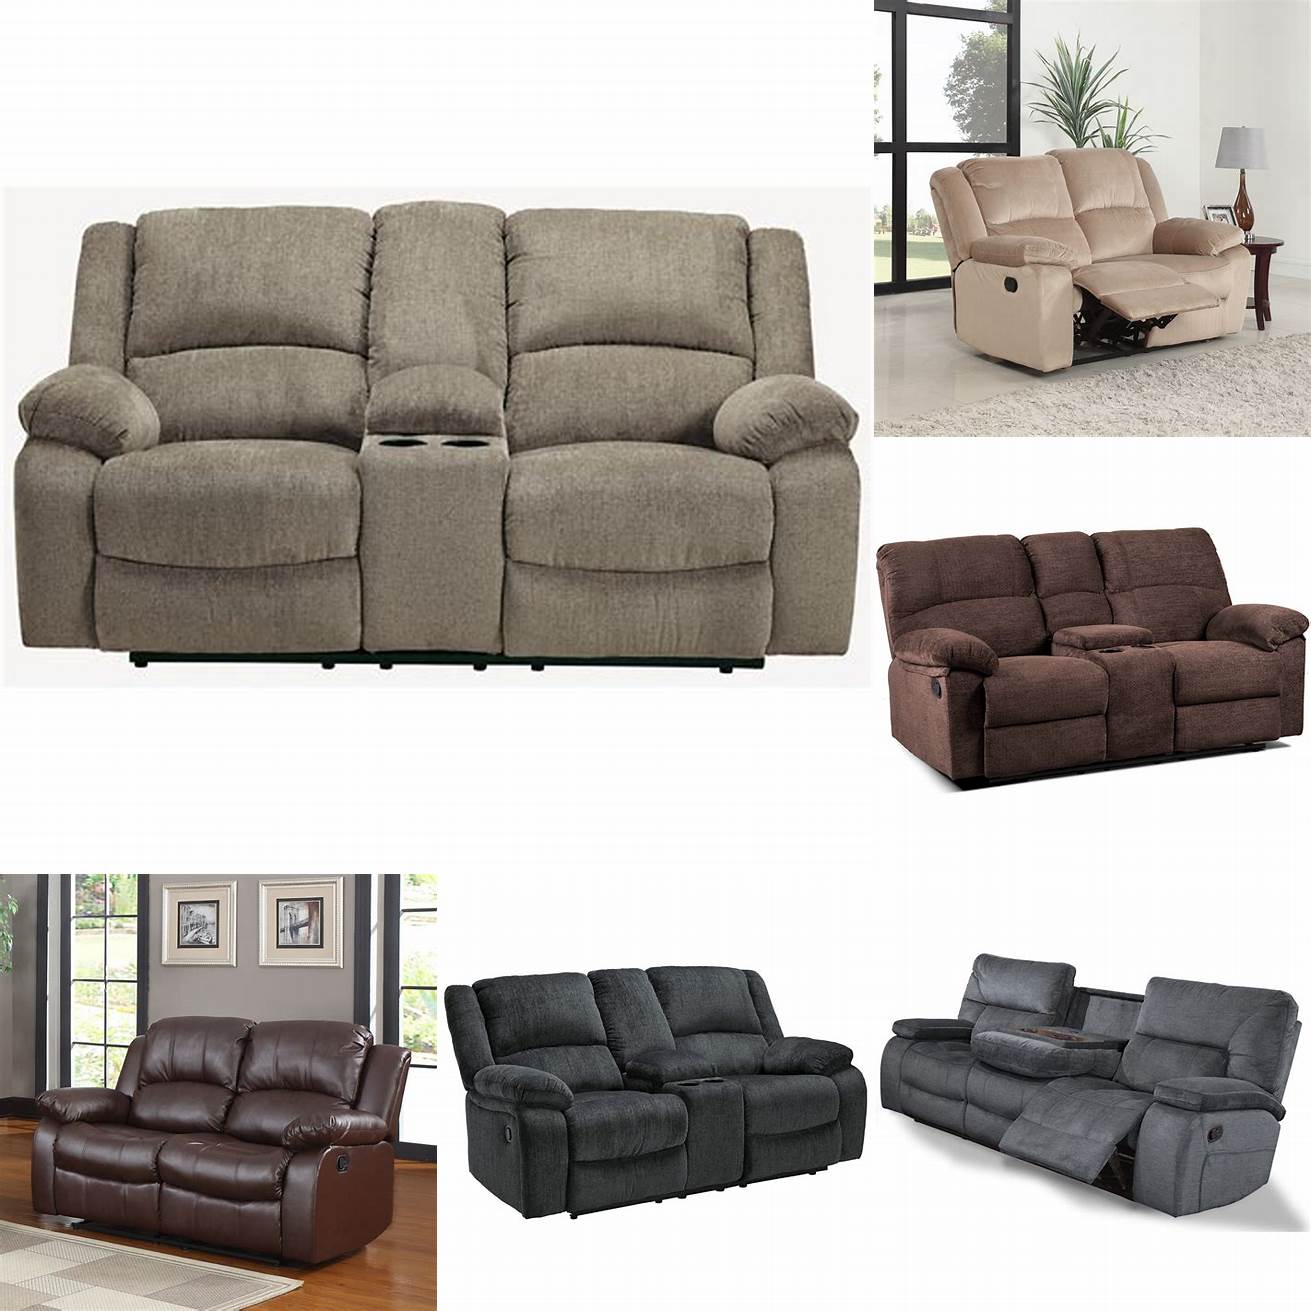 Double recliner sofa in a living room